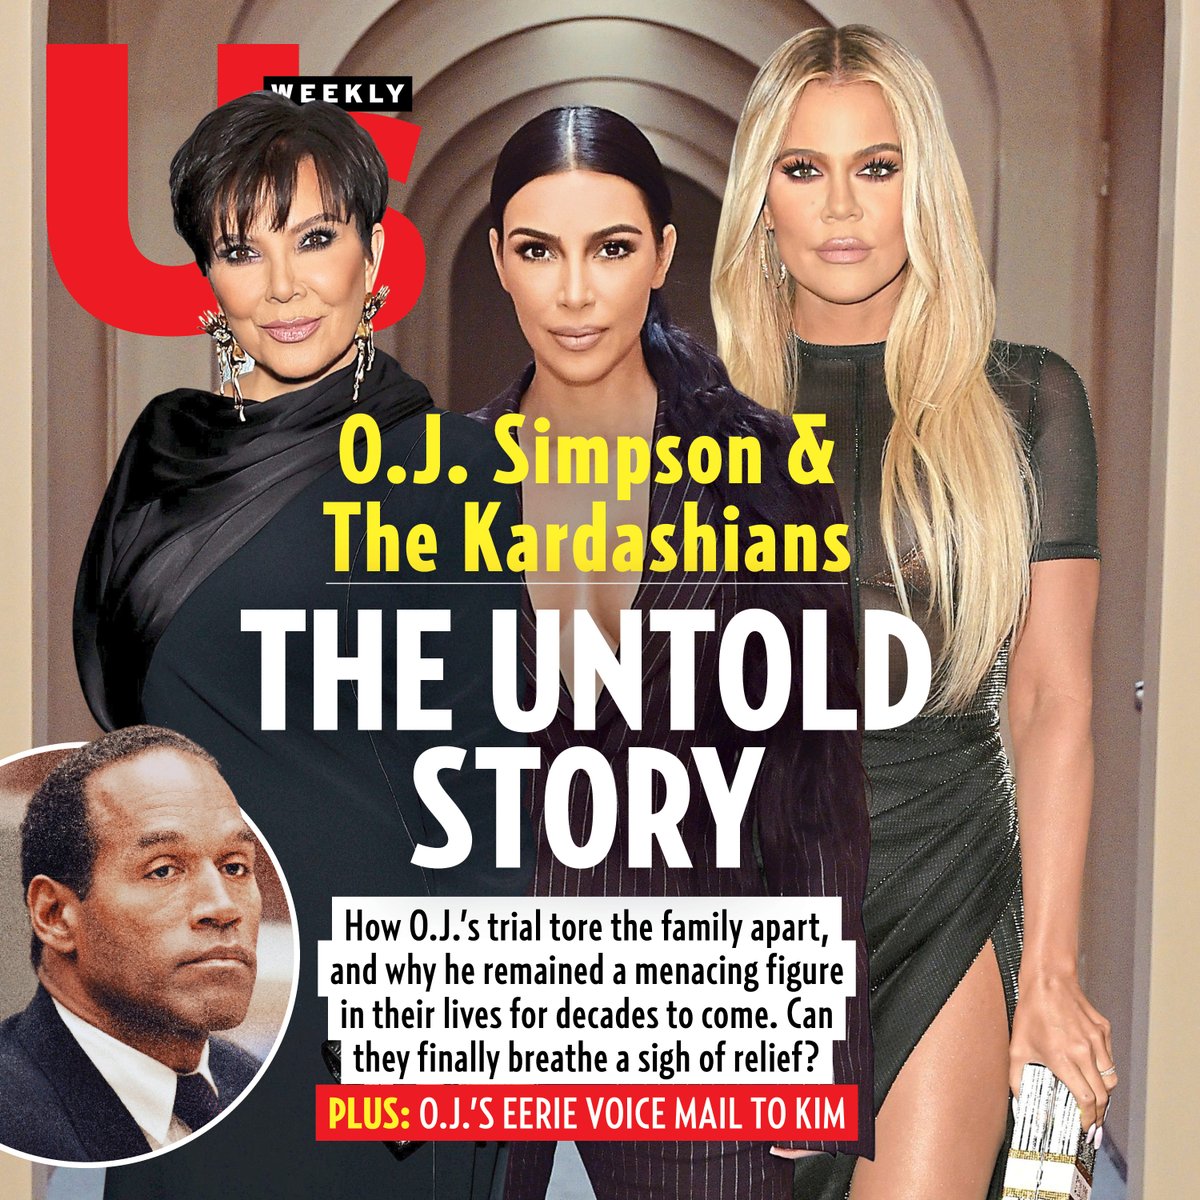 Despite (or perhaps because of) their complex ties to his family and murder trial, #TheKardashians have rarely spoken about O.J. Simpson. In the wake of his death, sources have come forward to reveal that he posed a continued “threat” to the family that they “dealt with daily.”